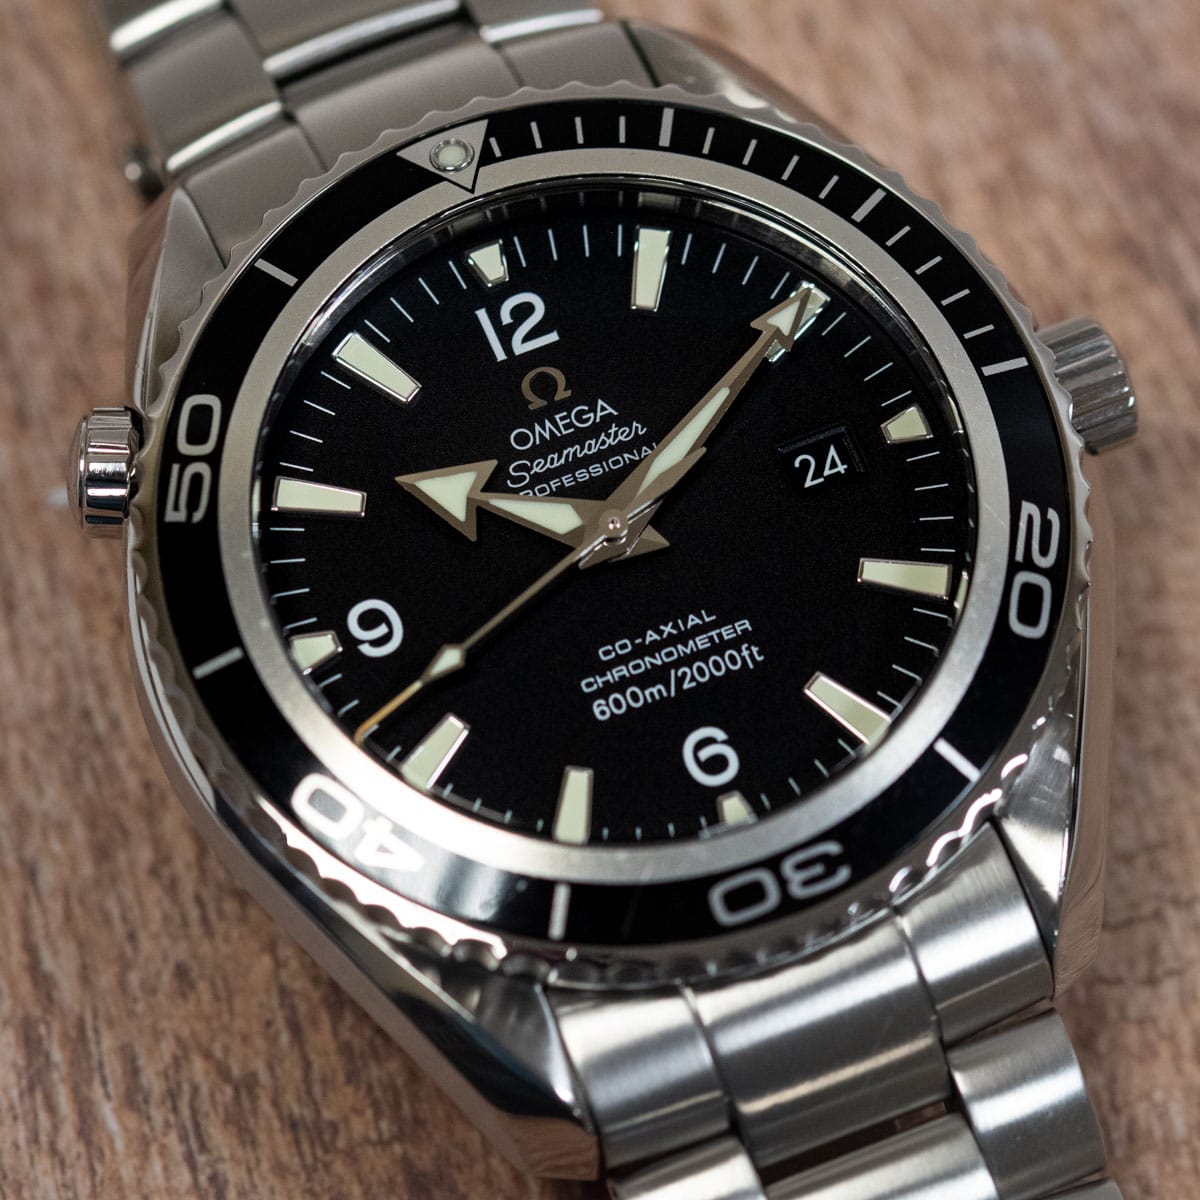 Stylied photo of  of Seamaster Planet Ocean XL